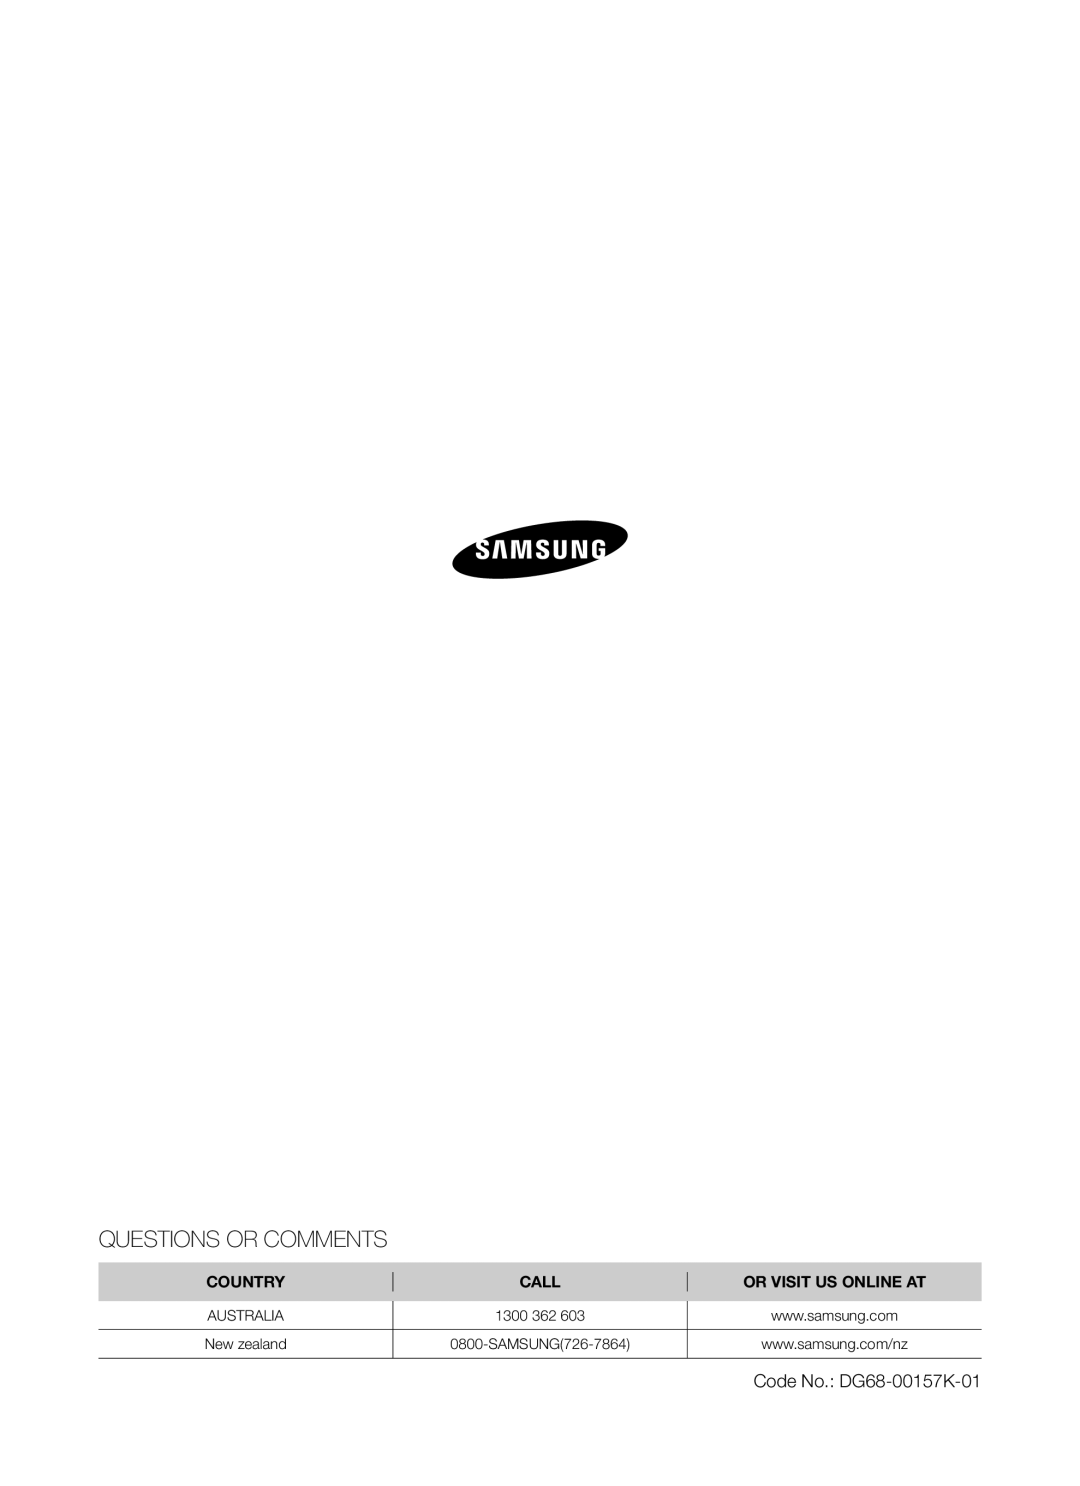 Samsung BT621 Series user manual Questions Or Comments, Country, Call, Or Visit Us Online At, New zealand, SAMSUNG726-7864 